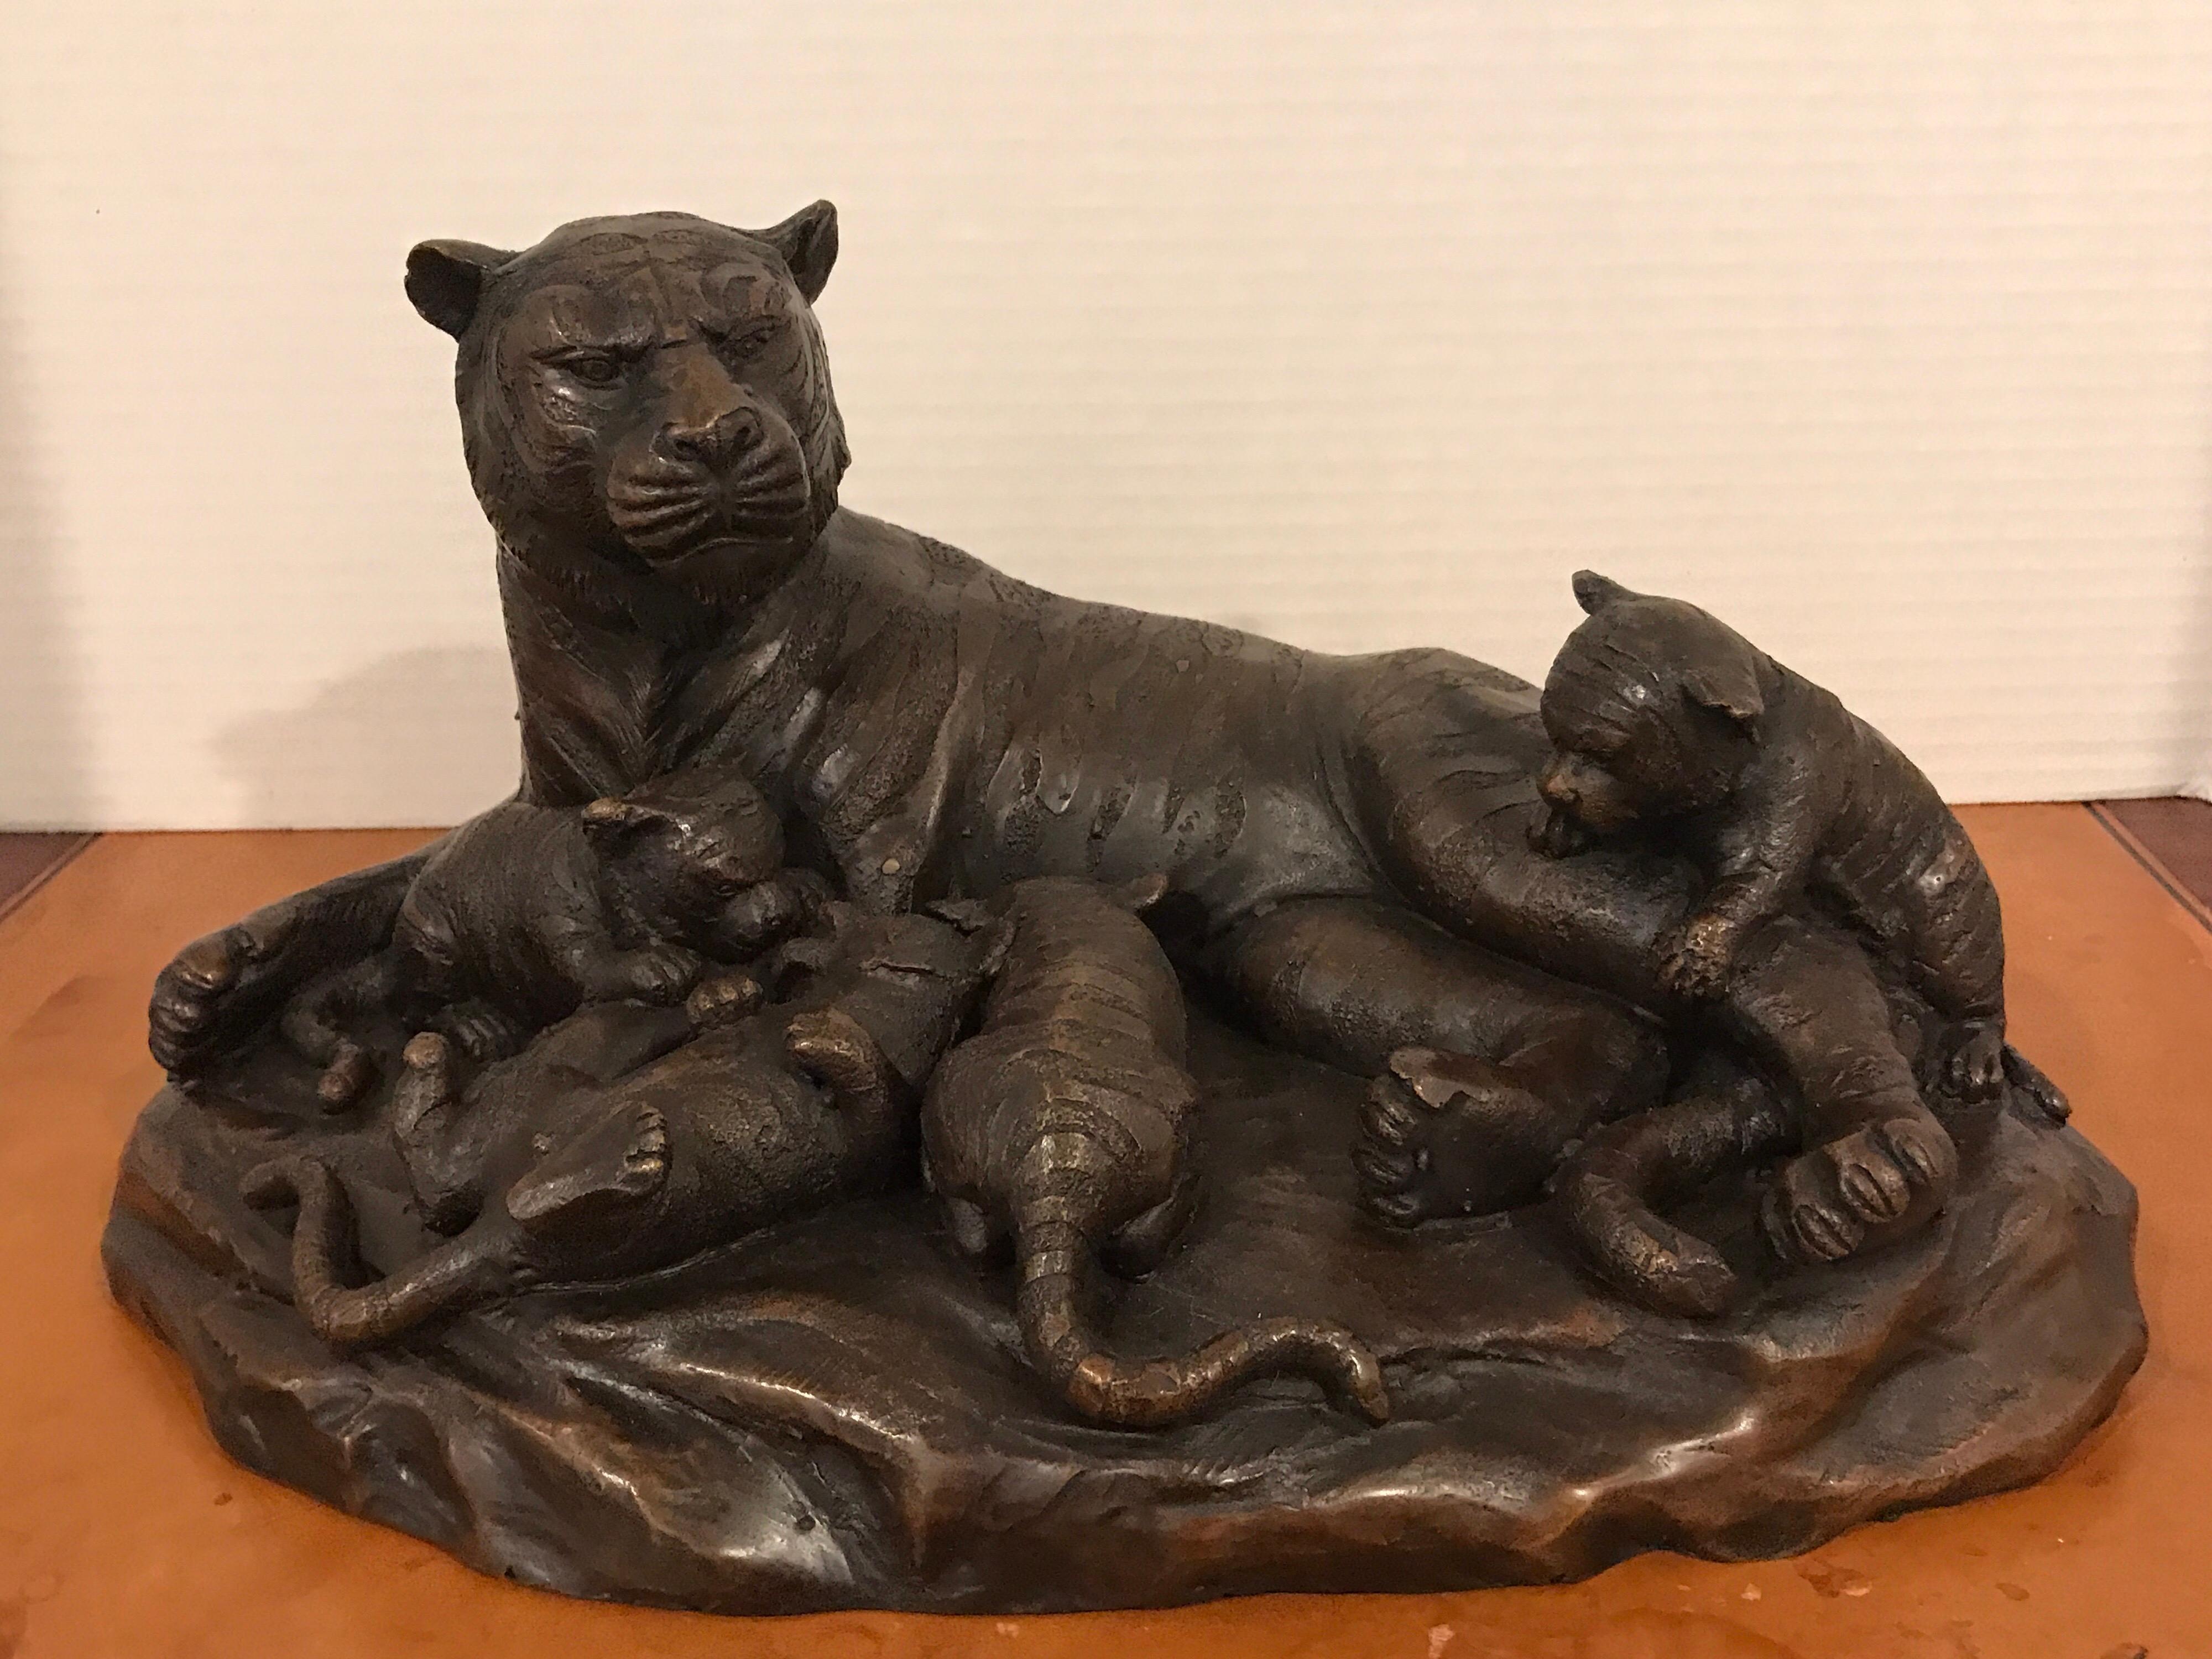 Meiji period bronze grouping of tigers, depicting tigress and cubs bronze, realistically cast and modeled, with four frolicking cubs, unmarked.